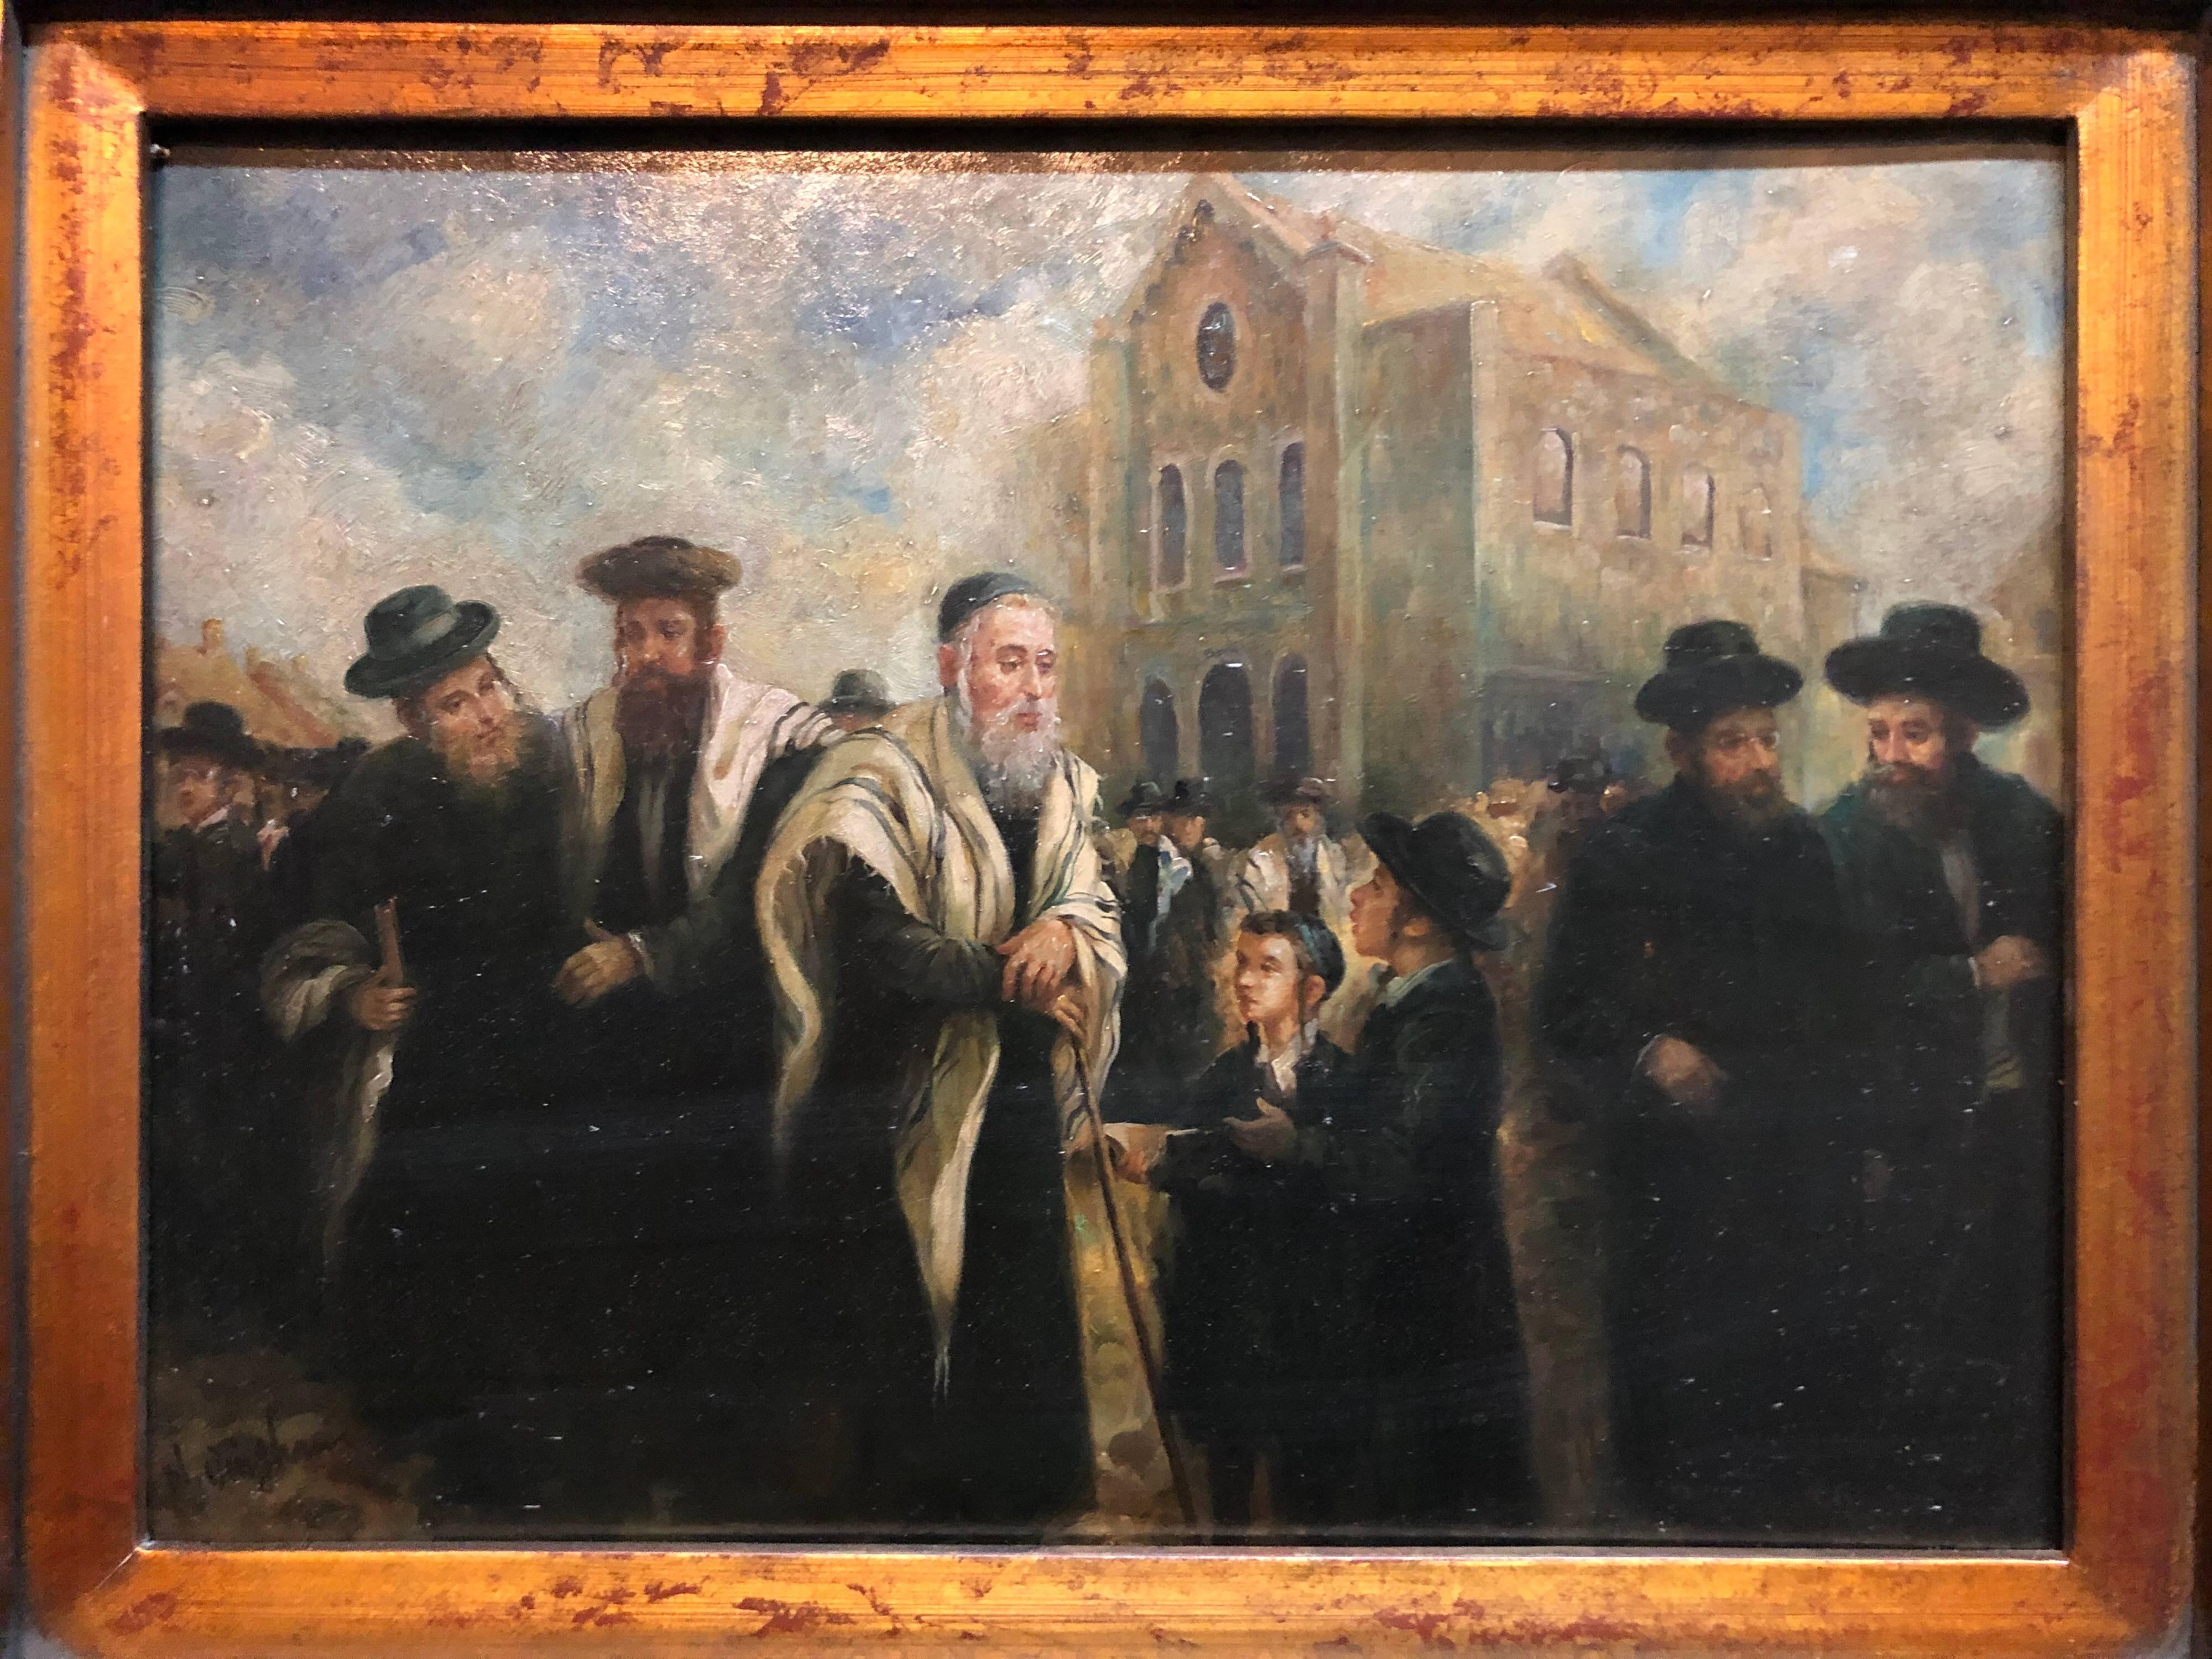 Realistic portrait of an older rabbi visiting and blessing a child in a European marketplace. Here the artist conveys a sense of quiet grandeur through the eyes of his subject and the way it's rendered. following a distinguished European lineage of